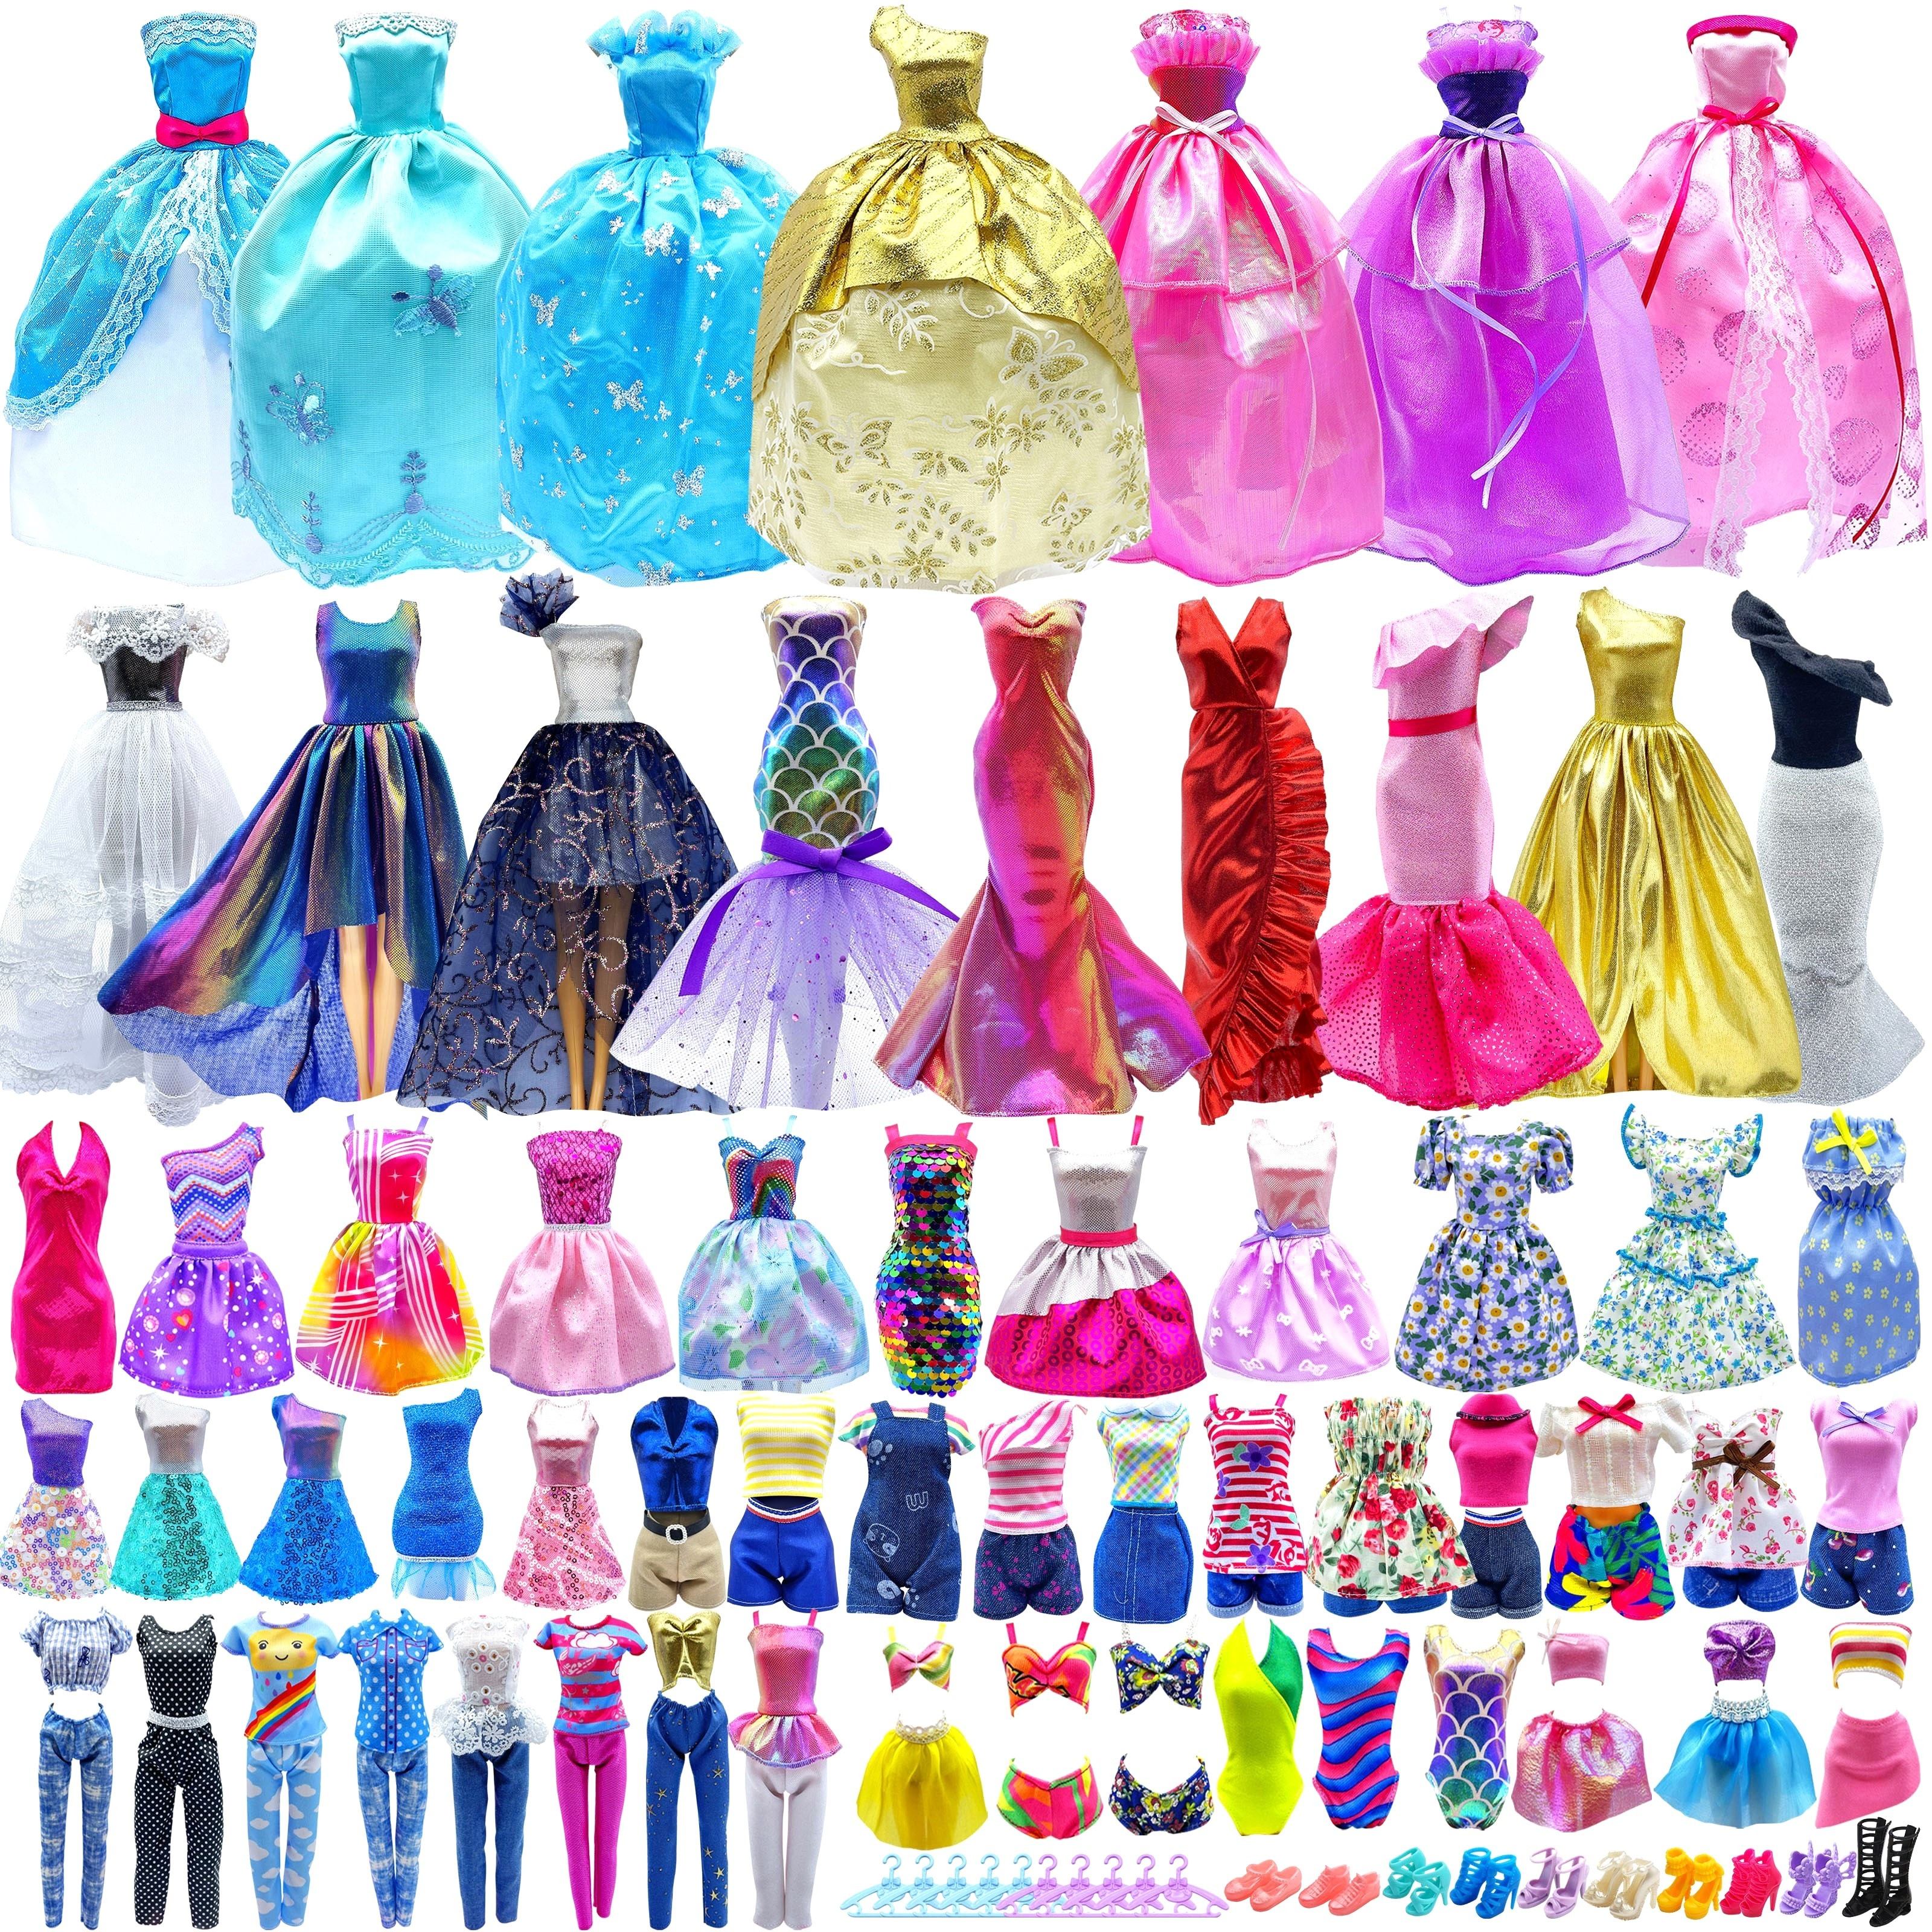 10 Pack Set Doll Clothes Fashion Dress Vintage Outfit For Barbie Dolls 11.5  inch